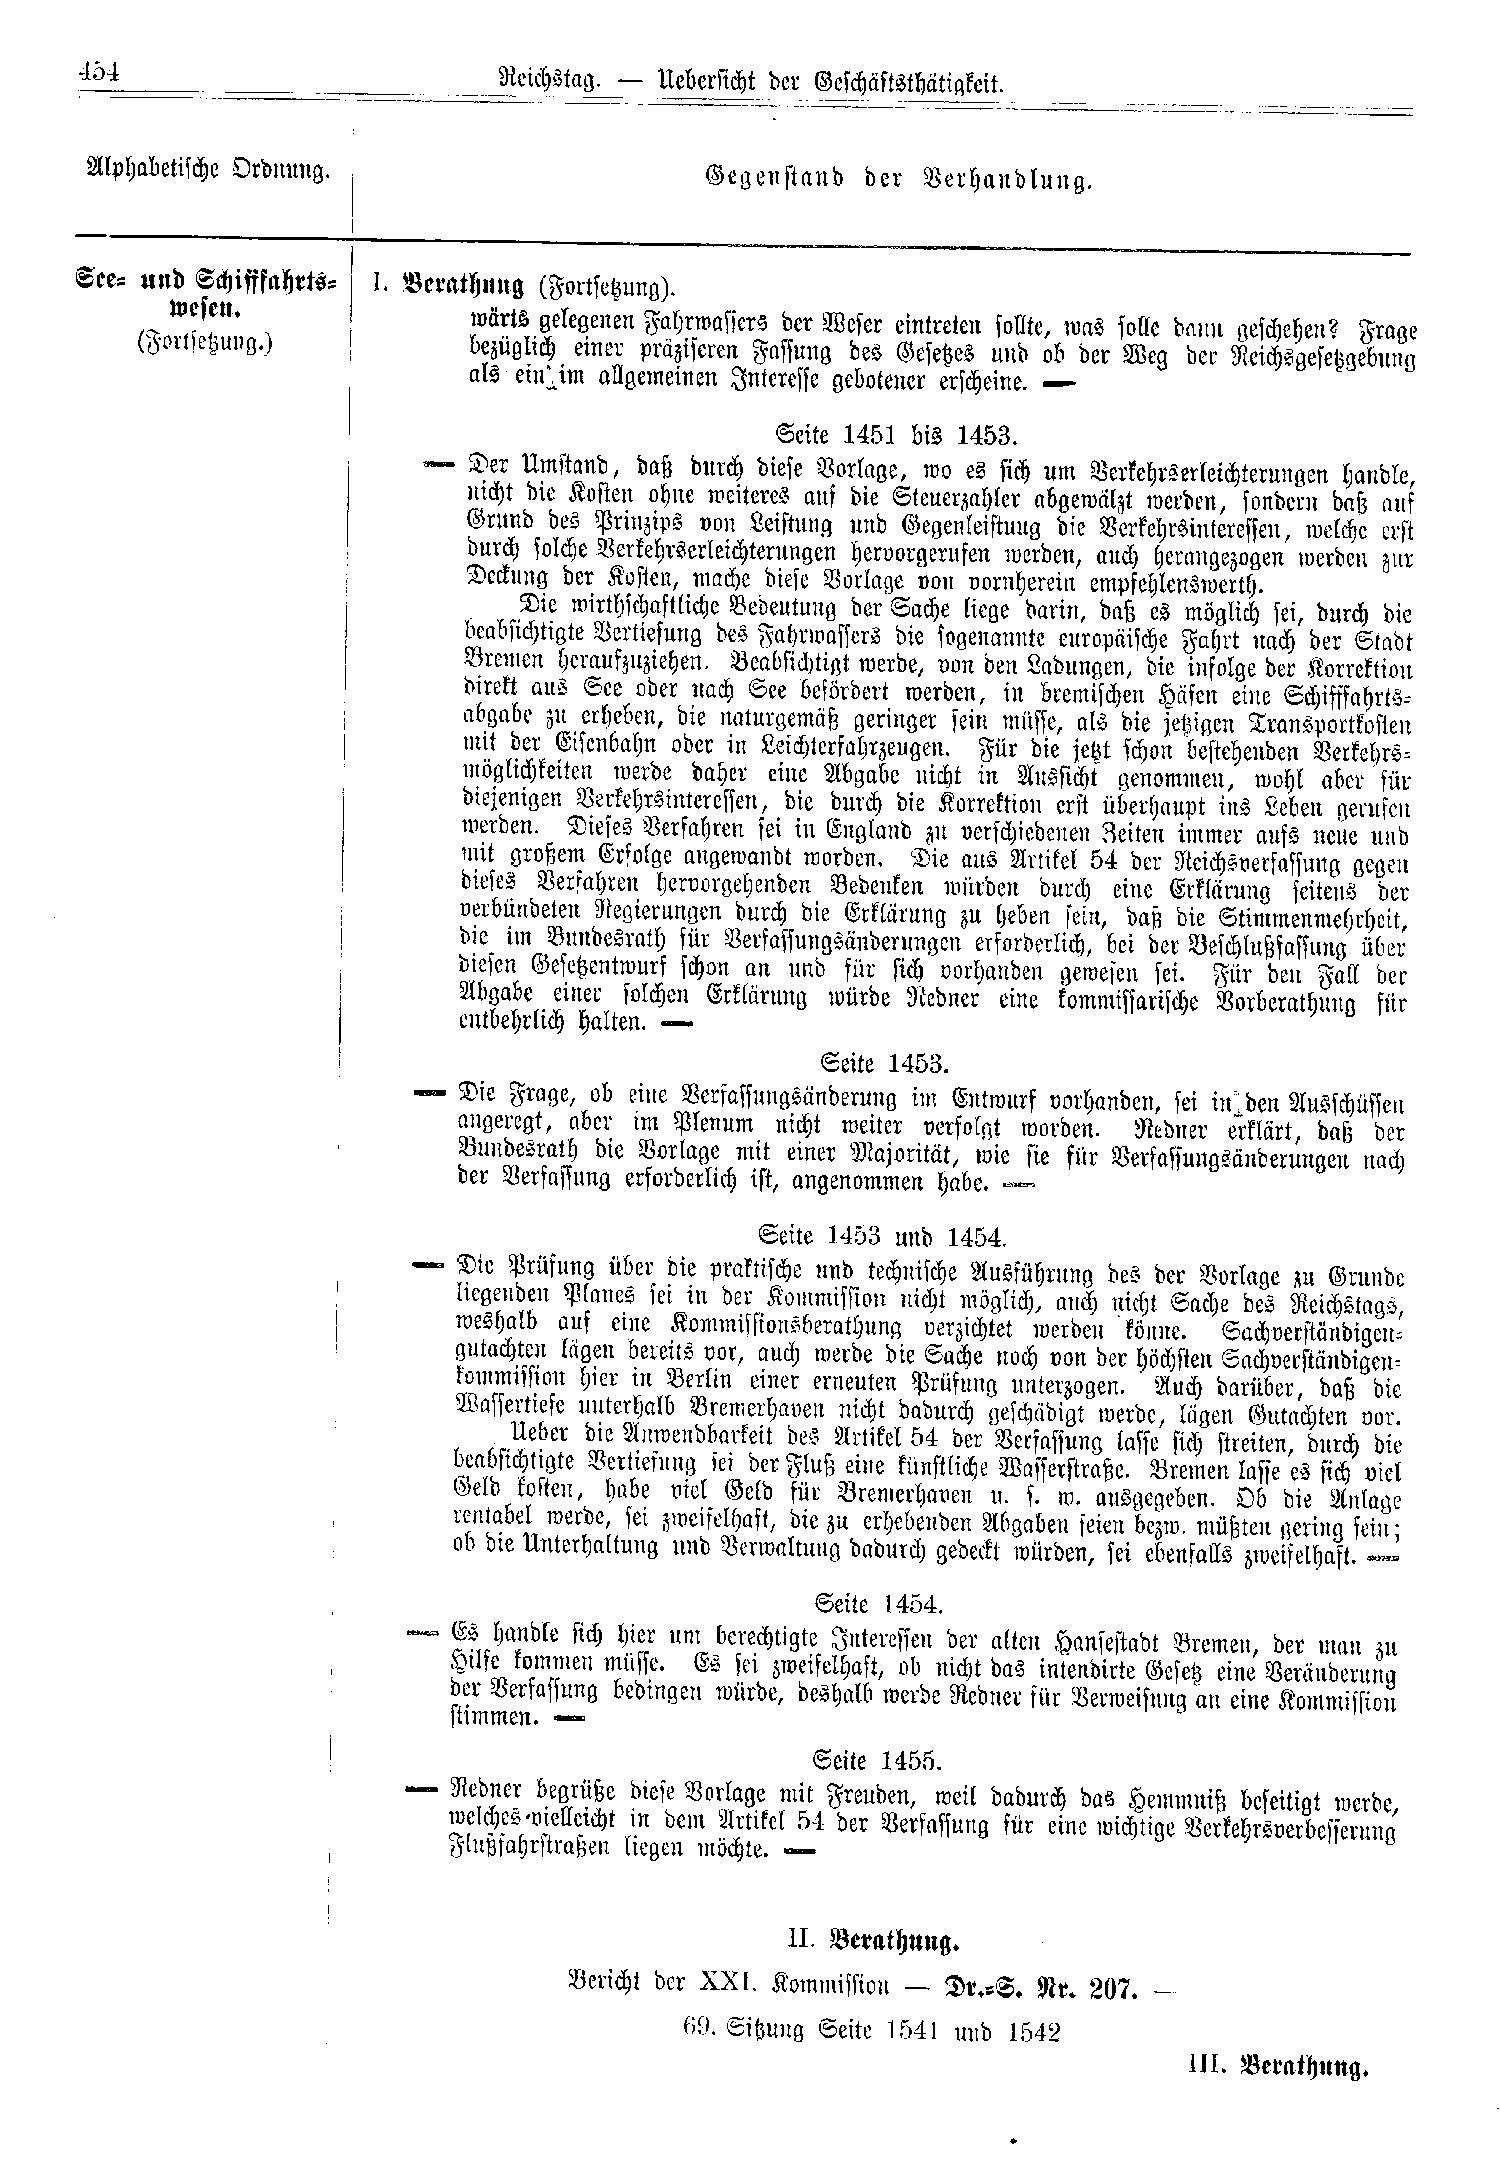 Scan of page 454